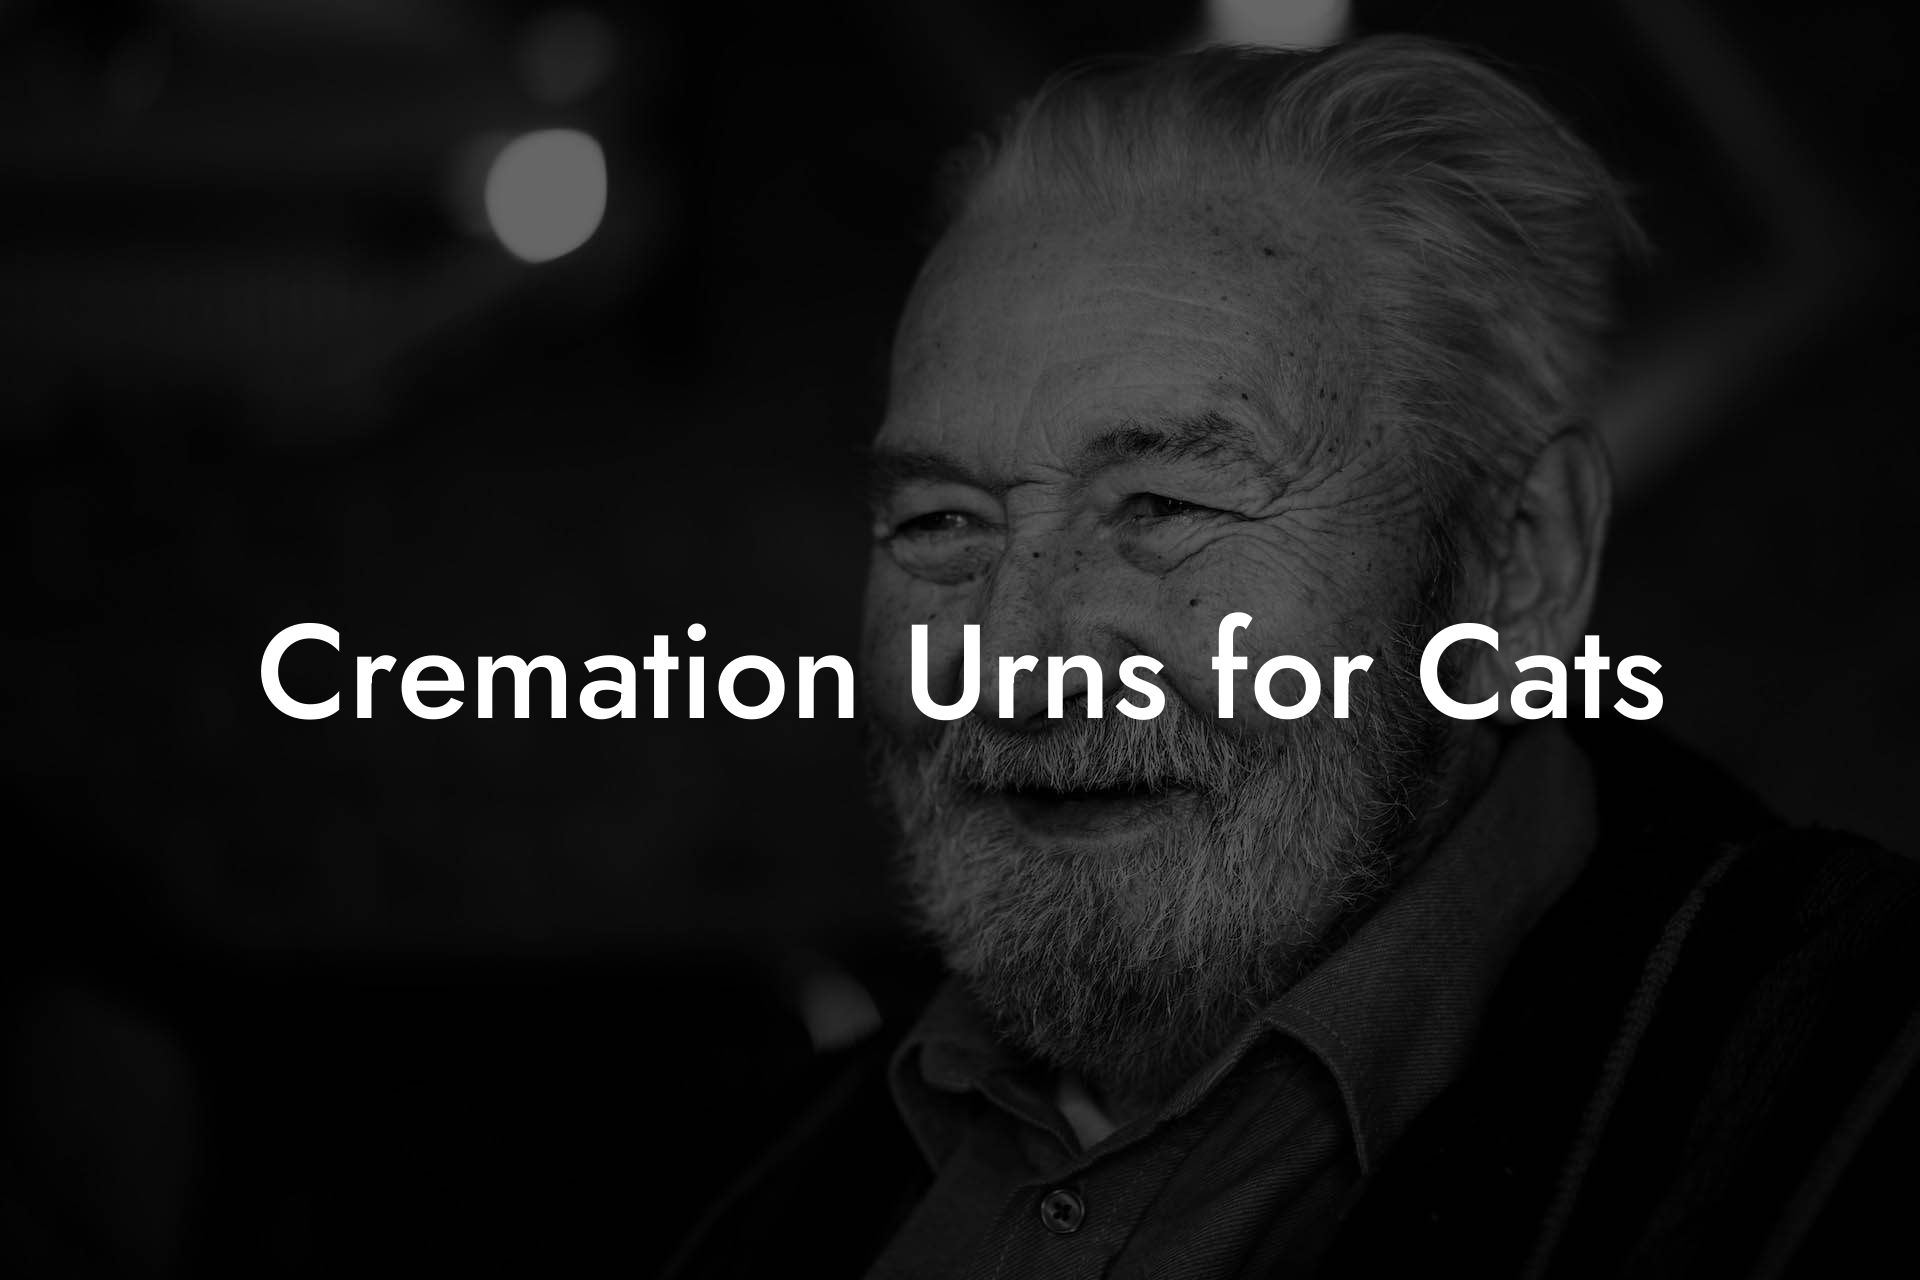 Cremation Urns for Cats